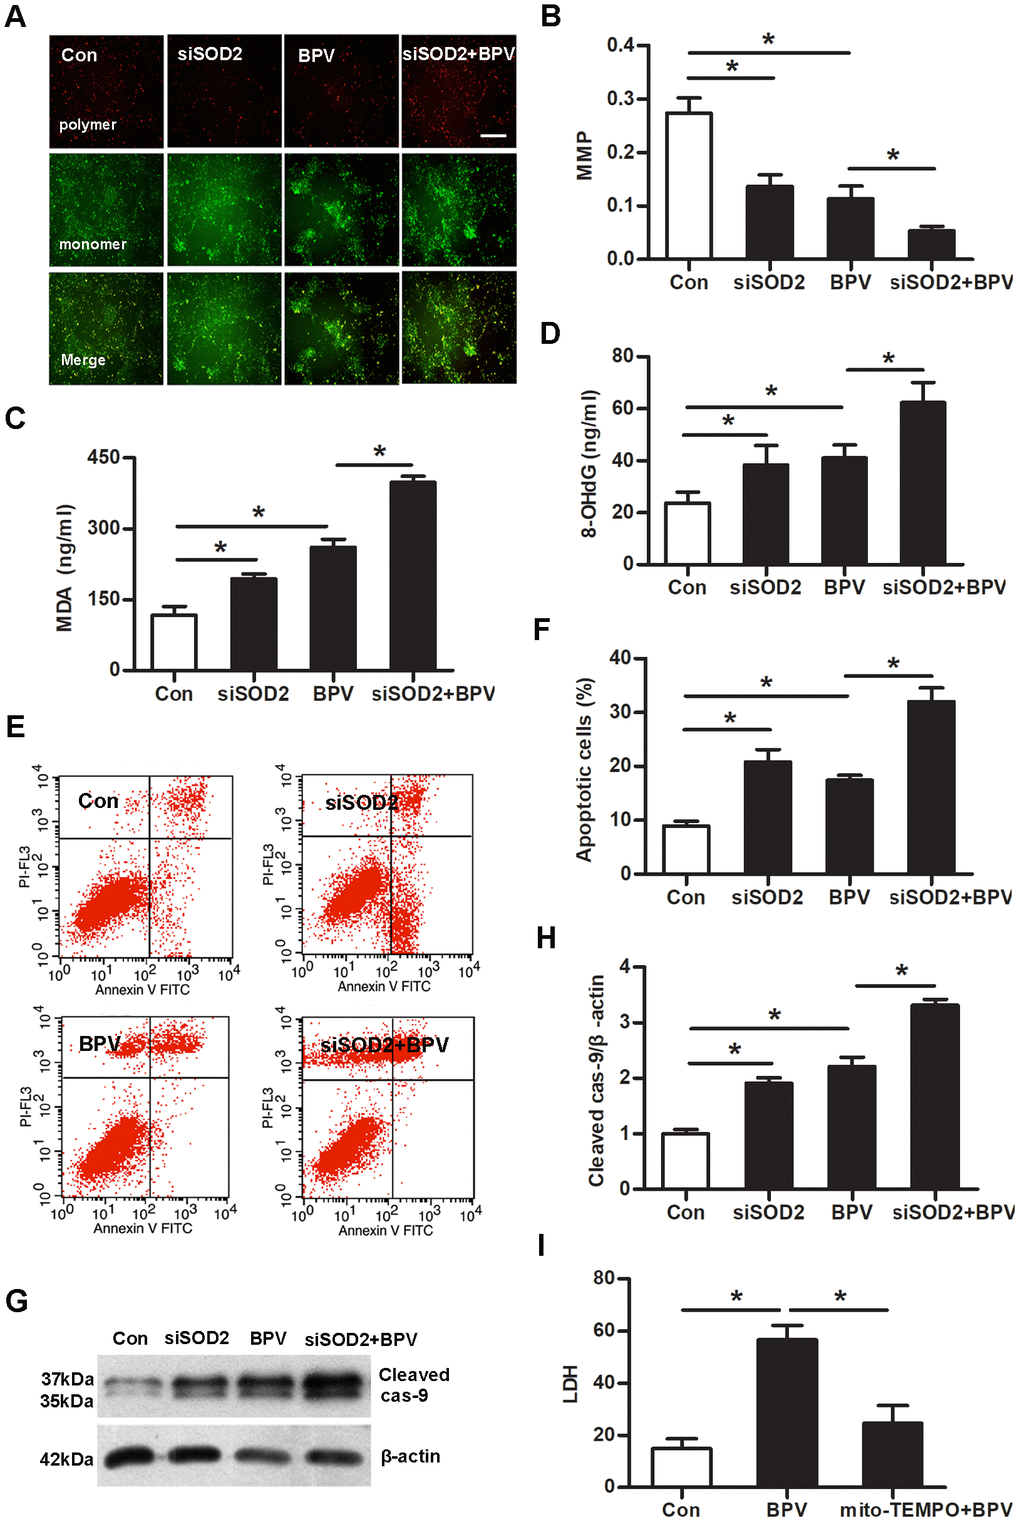 SOD2 gene knock-down enhanced BPV-induced neurotoxic injury and mito-TEMPO attenuated above injury. Con: cells transfected with silencer negative control siRNA; siSOD2: cells transfected with SOD2 siRNA. BPV: cells transfected with silencer negative control siRNA and cultured with 2.0 mM BPV for 60 min; siSOD2+BPV: cells transfected with SOD2 siRNA and cultured with 2.0 mM BPV for 60 min. (A, B) MMP was monitored by determining the relative amount of dual emissions from mitochondrial JC-1 monomers or aggregates using flow cytometry. Mitochondrial depolarization is indicated by a decrease in the polymer/monomer fluorescence. scale bar 200 μm. (C, D) MDA and 8-OHdG were detected by ELISA; (E–H) cells apoptosis was detected with flow cytometry and cleaved caspase-9 expression; (I) LDH production in cells treated with 2.0 mM BPV for 60 min and/or pretreated with 25 μM mito-TEMPO for 60 min. Values are the mean± SEM of n = 3, *: P